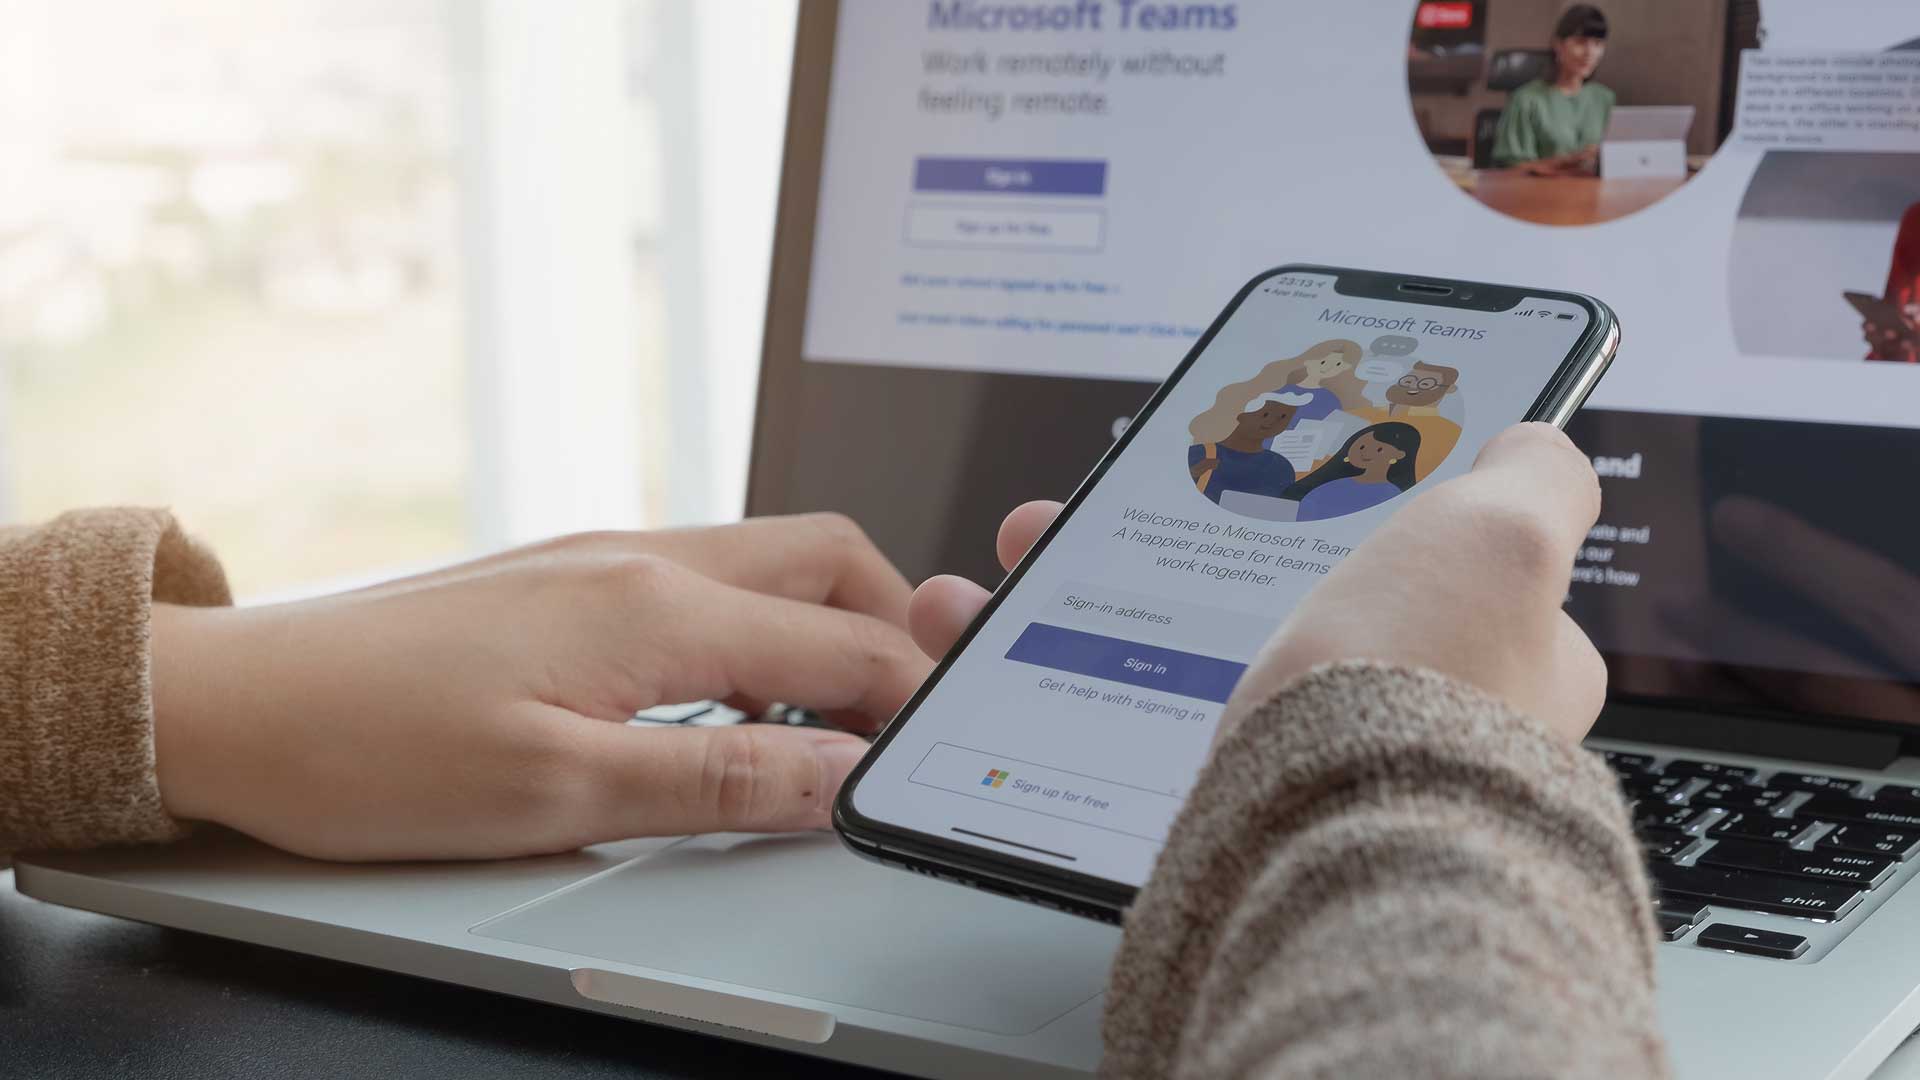 Why’s Microsoft Teams Ideal for the Virtual Office